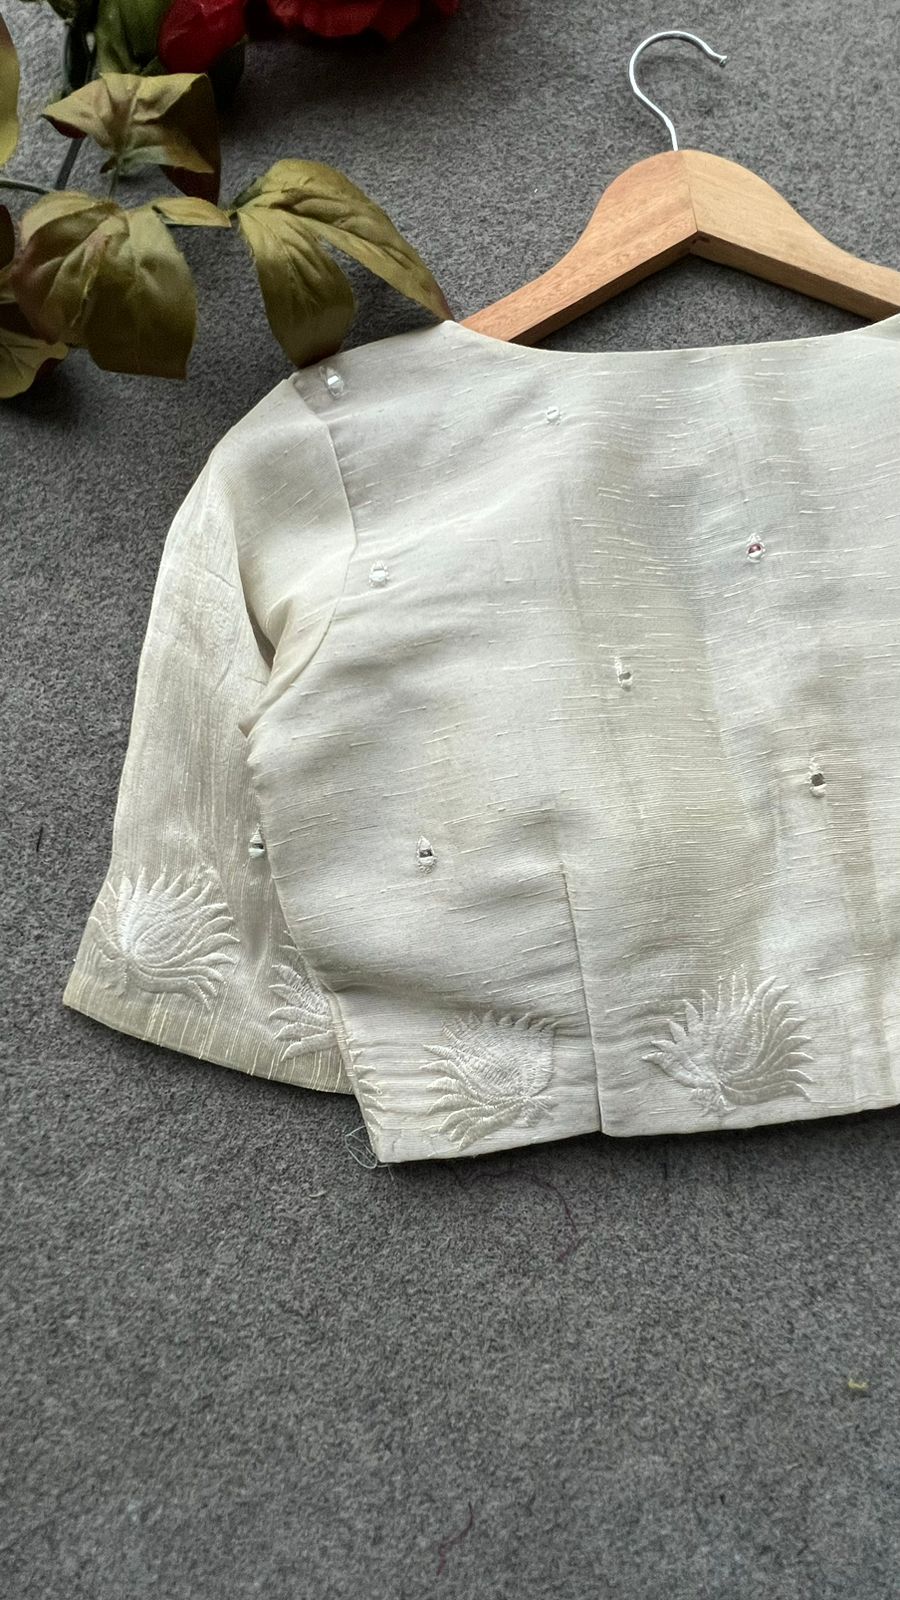 Silver tissue mirror embroidery work blouse